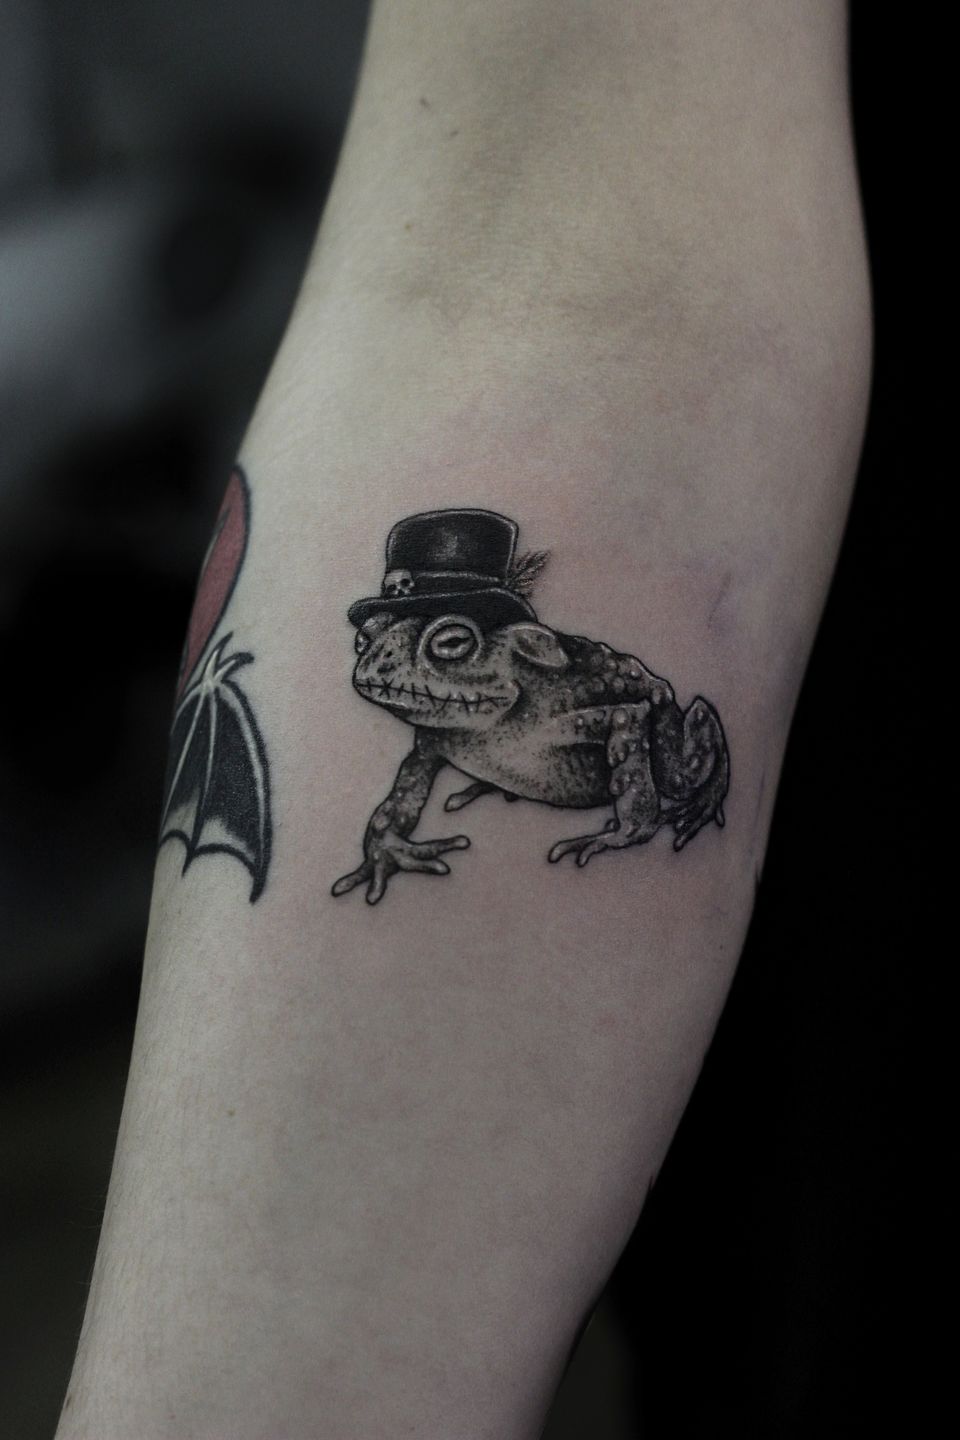 Frog Tattoos  Photos of Works By Pro Tattoo Artists at theYoucom